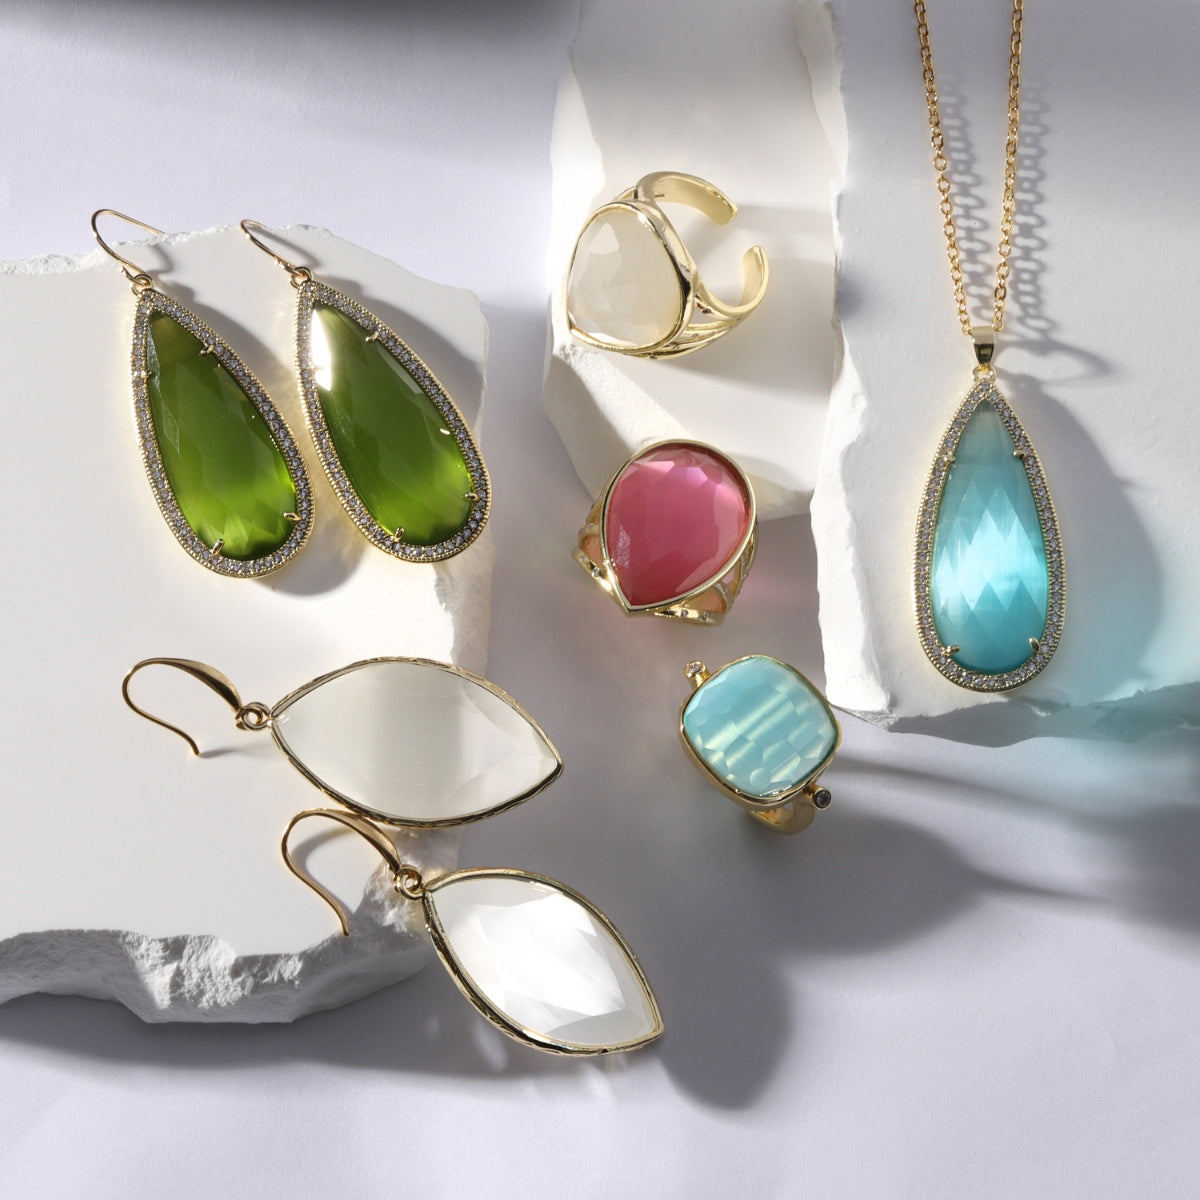 Jewelry with a touch of Color